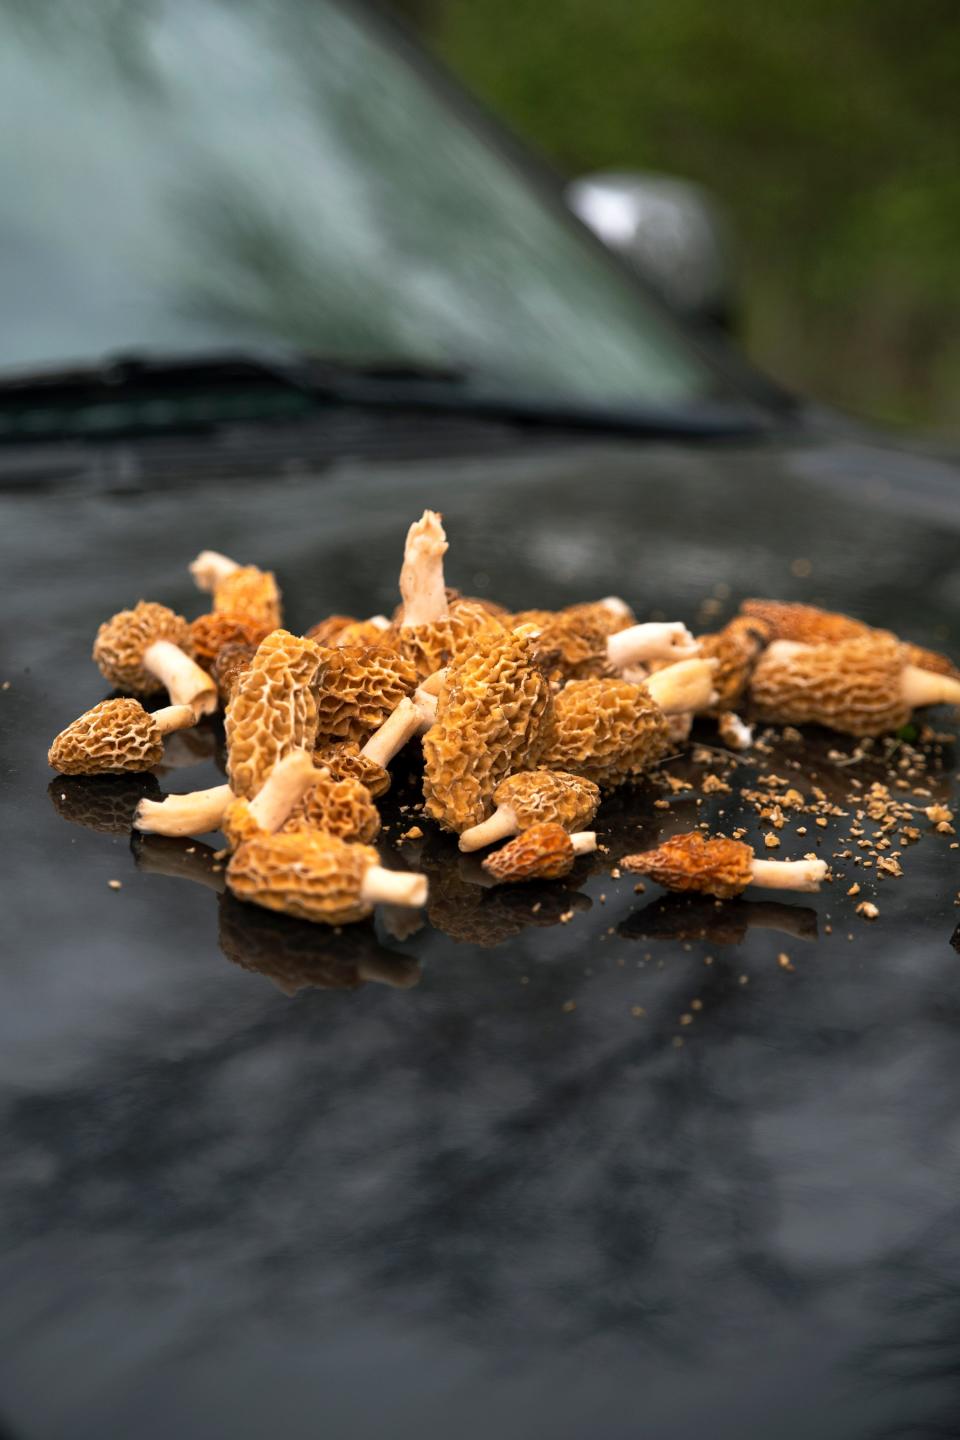 Steve Roberts and his father, Ron, inspect roughly three pounds of morels on May 1, 2020. Roberts prepares them by halving them, rinsing them, and frying them with eggs and milk, sometimes with onion ring batter. Ron soaks them in saltwater beforehand. 